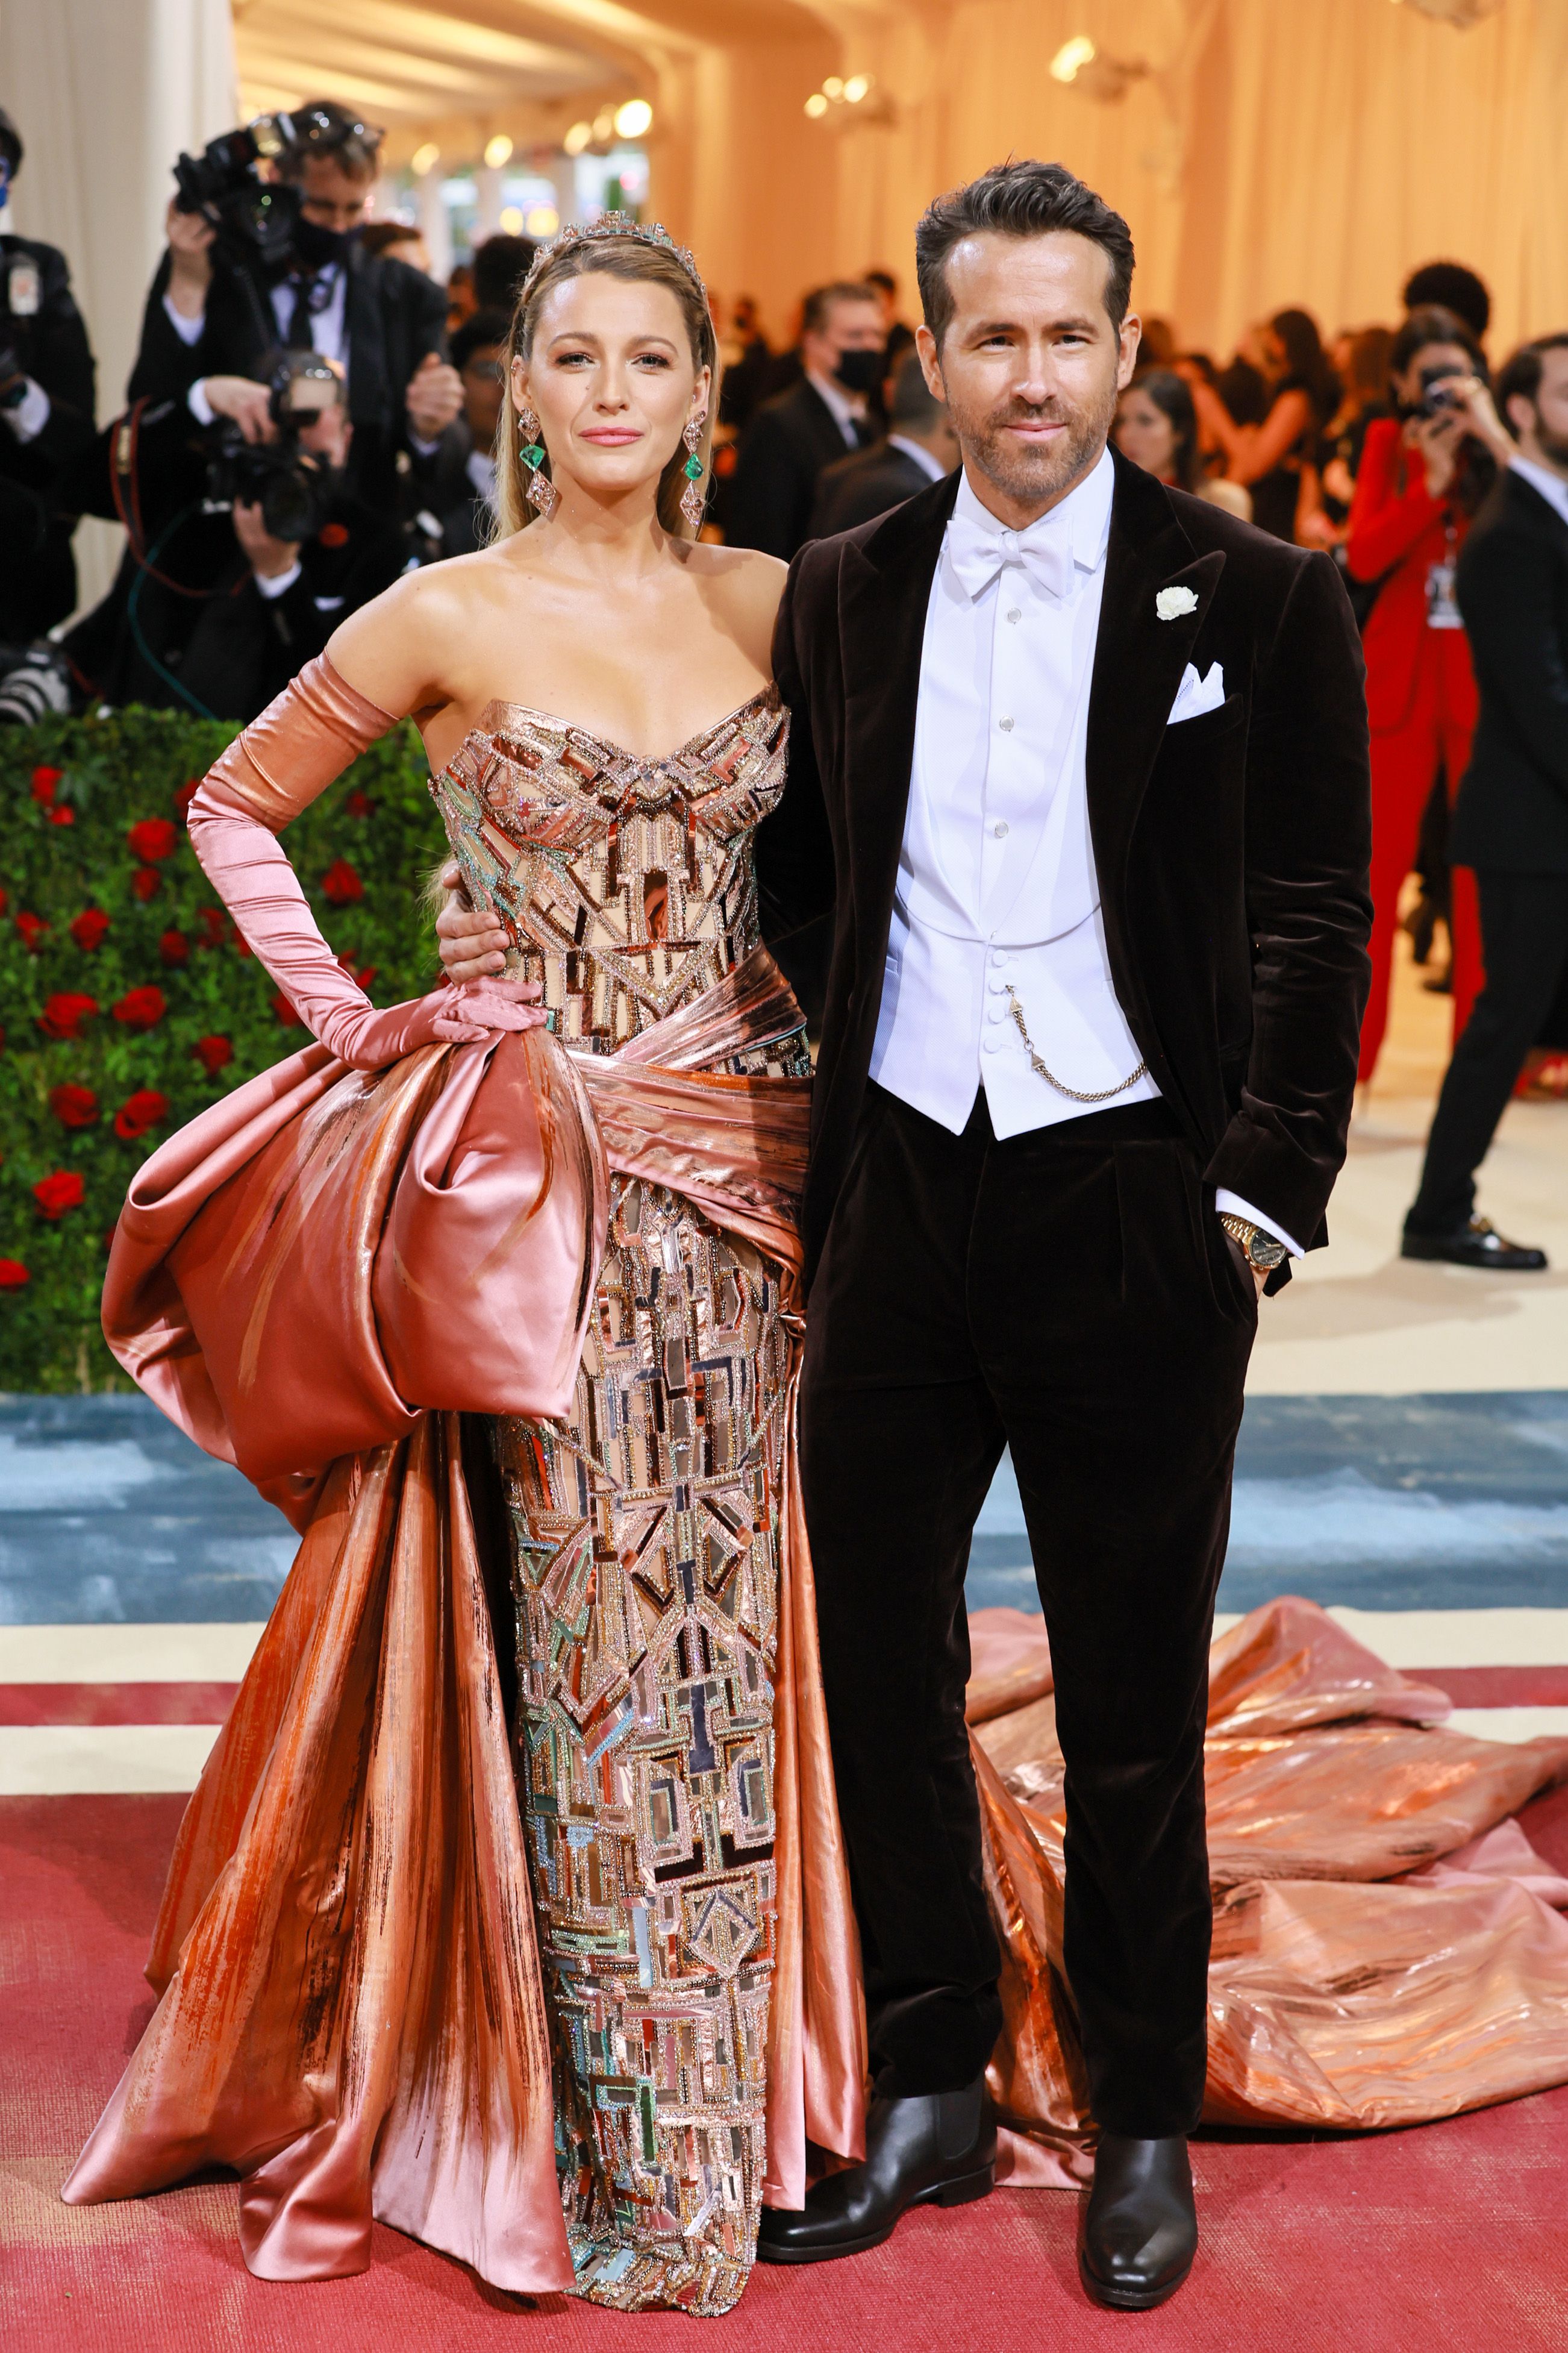 The 10 best dressed from the 2022 Met Gala